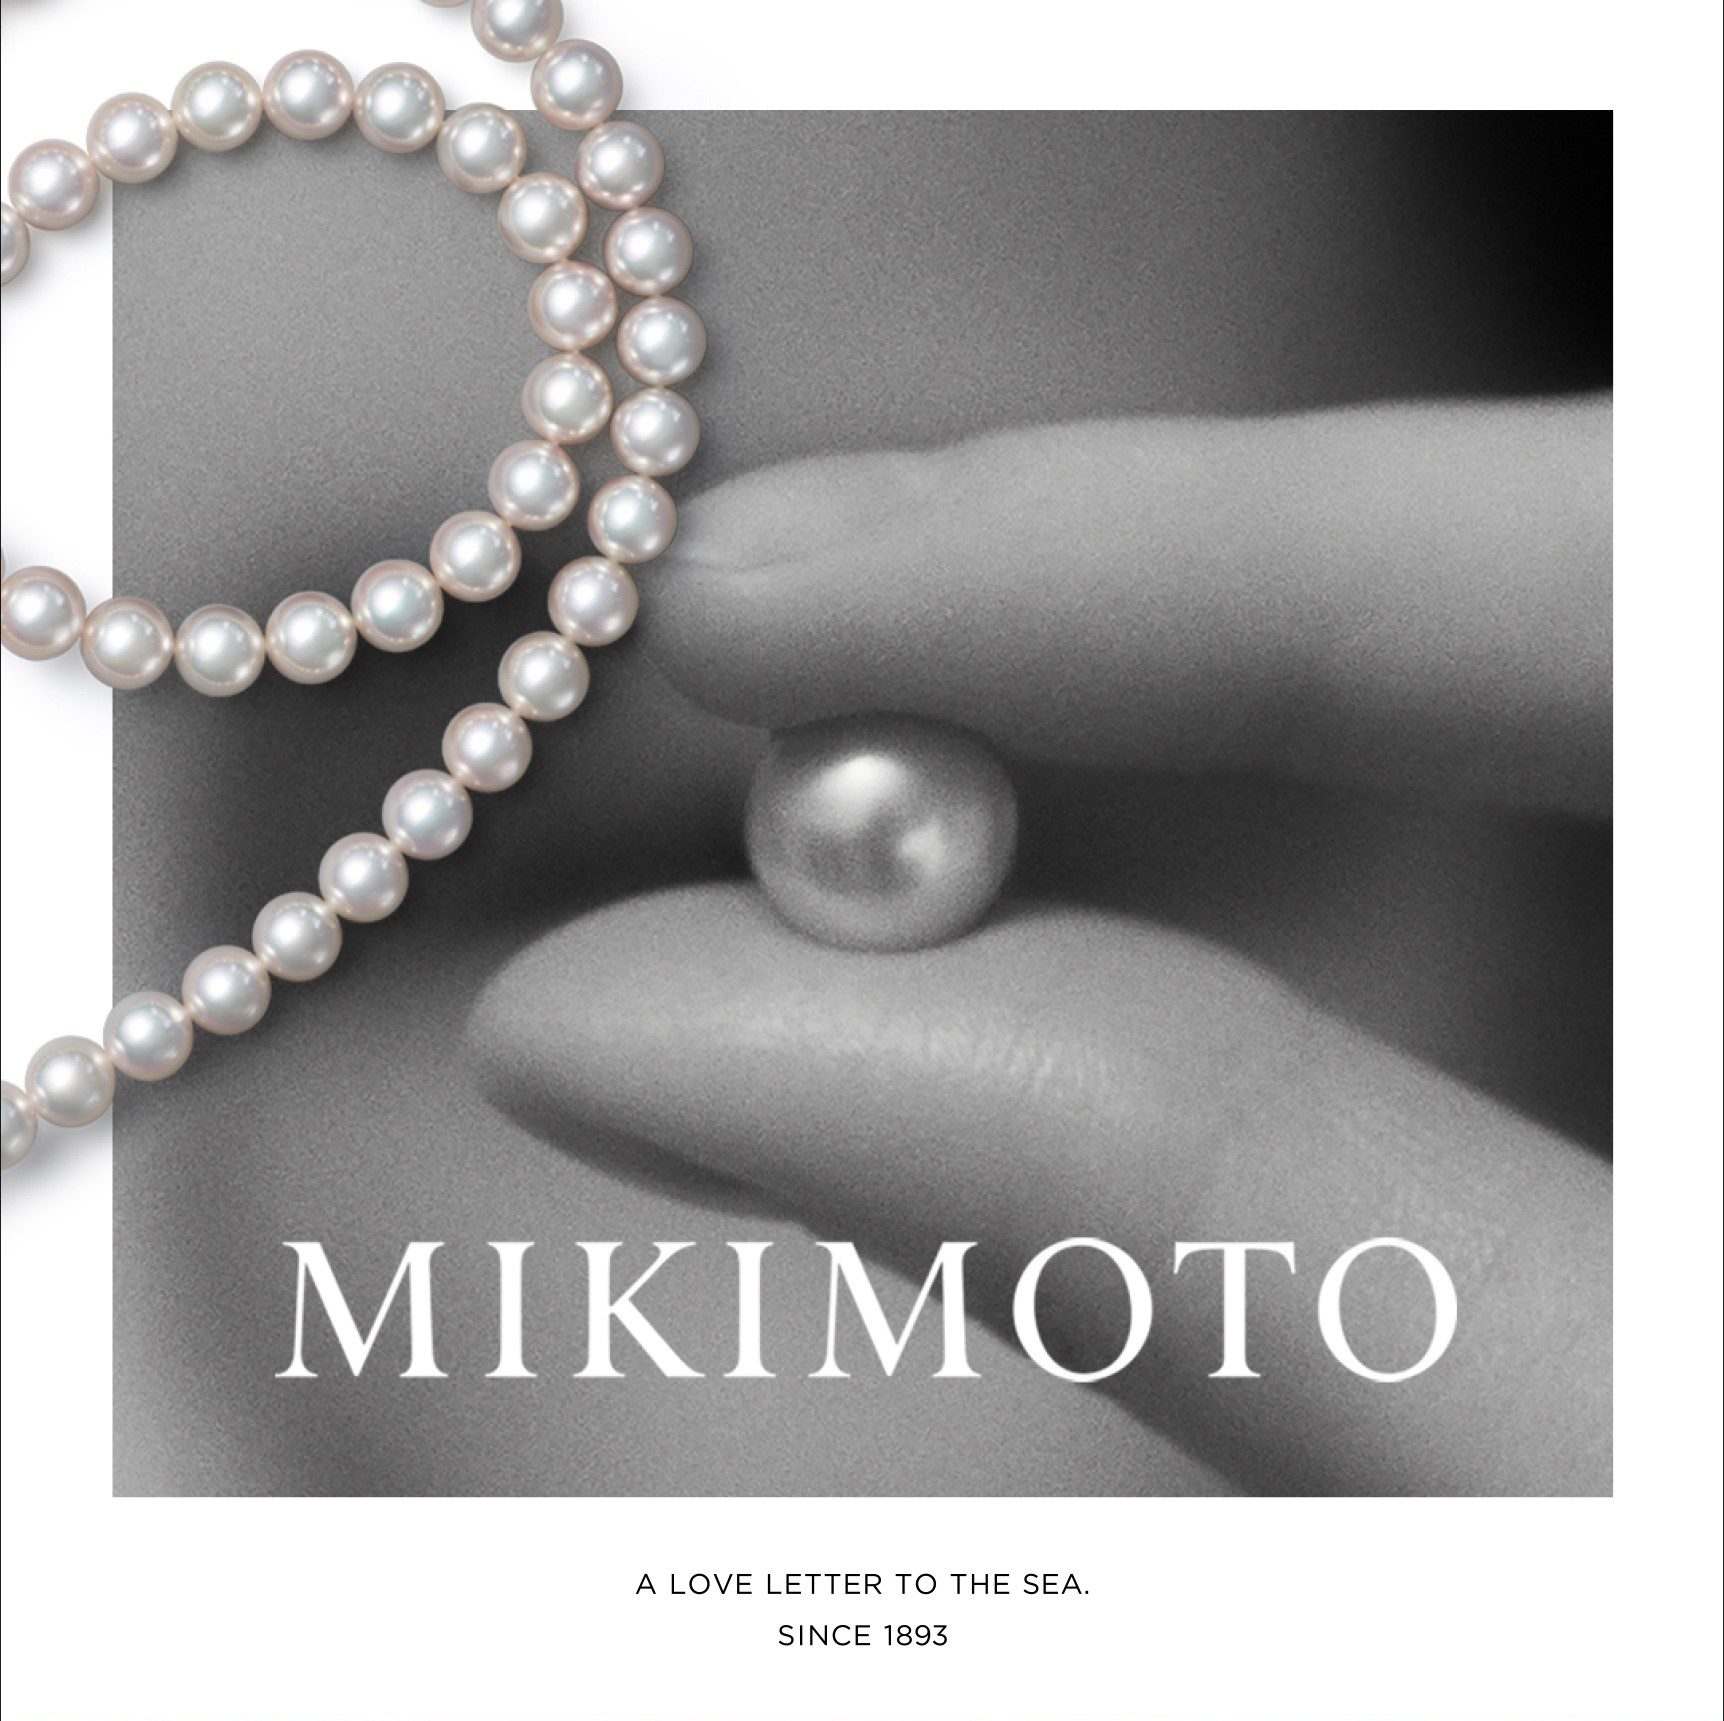 Mikimoto A love letter to the sea since 1893